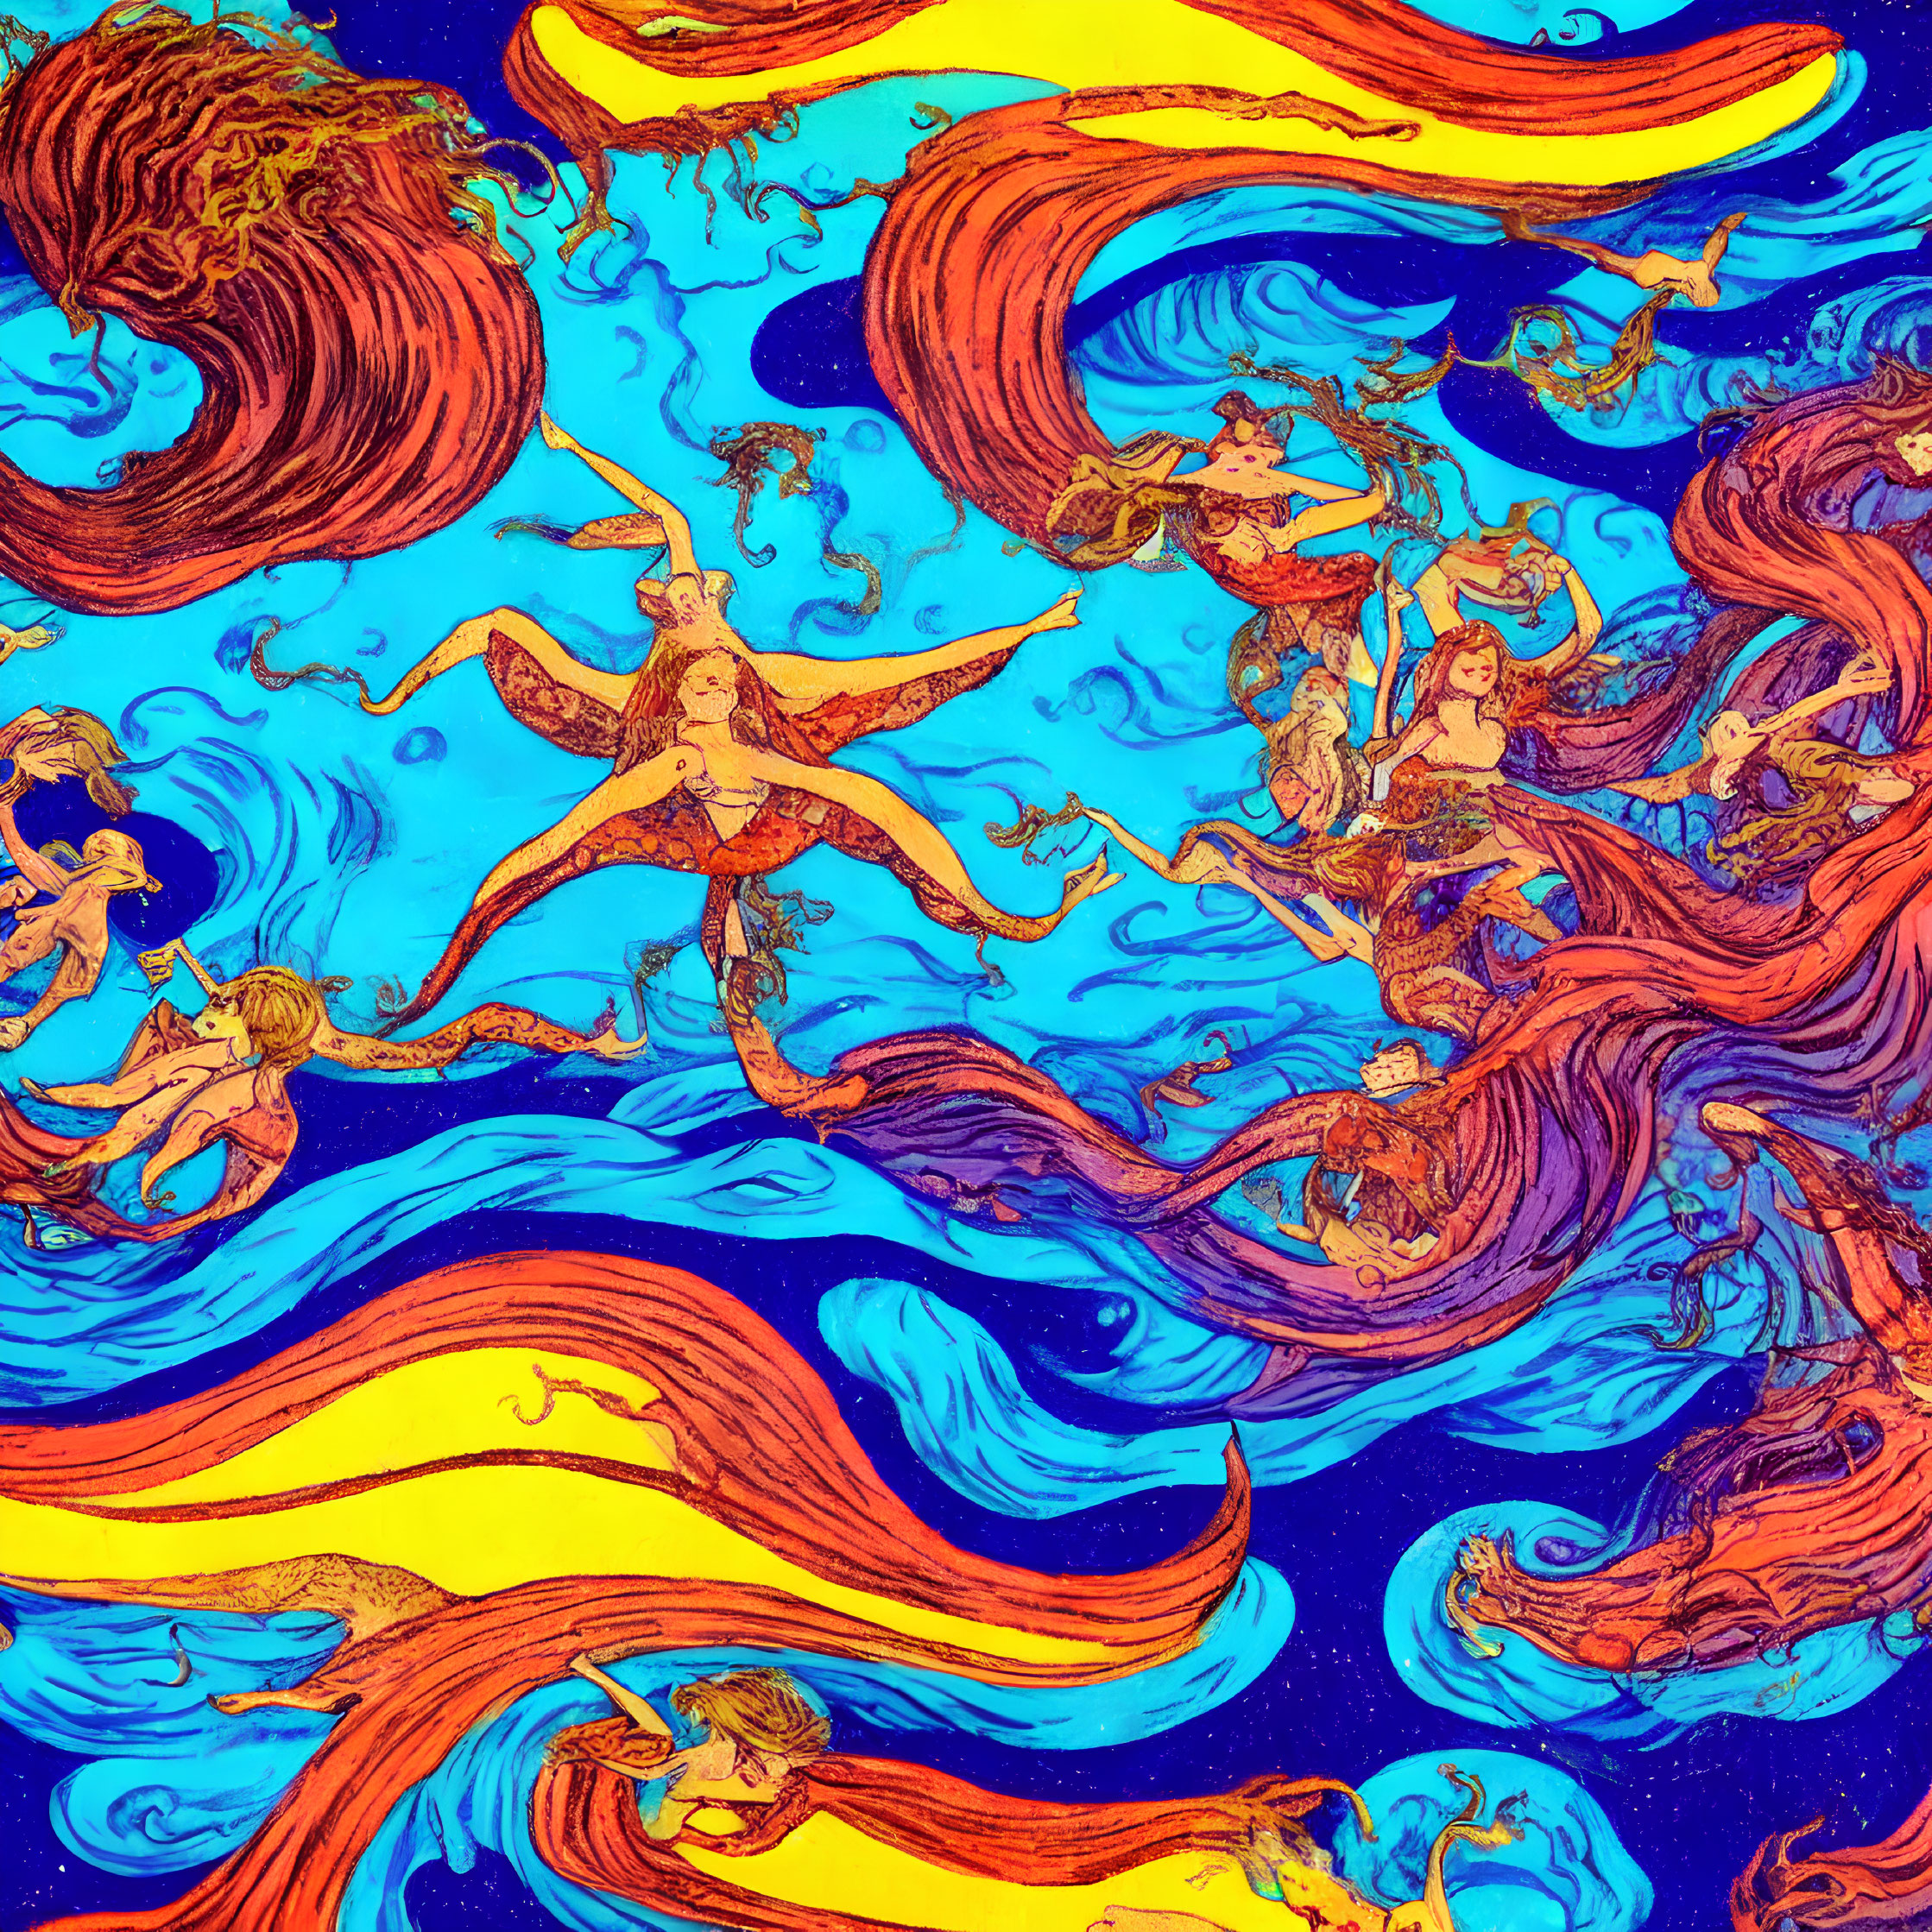 Colorful Mythological Sea Creatures in Swirling Waves and Starry Sky